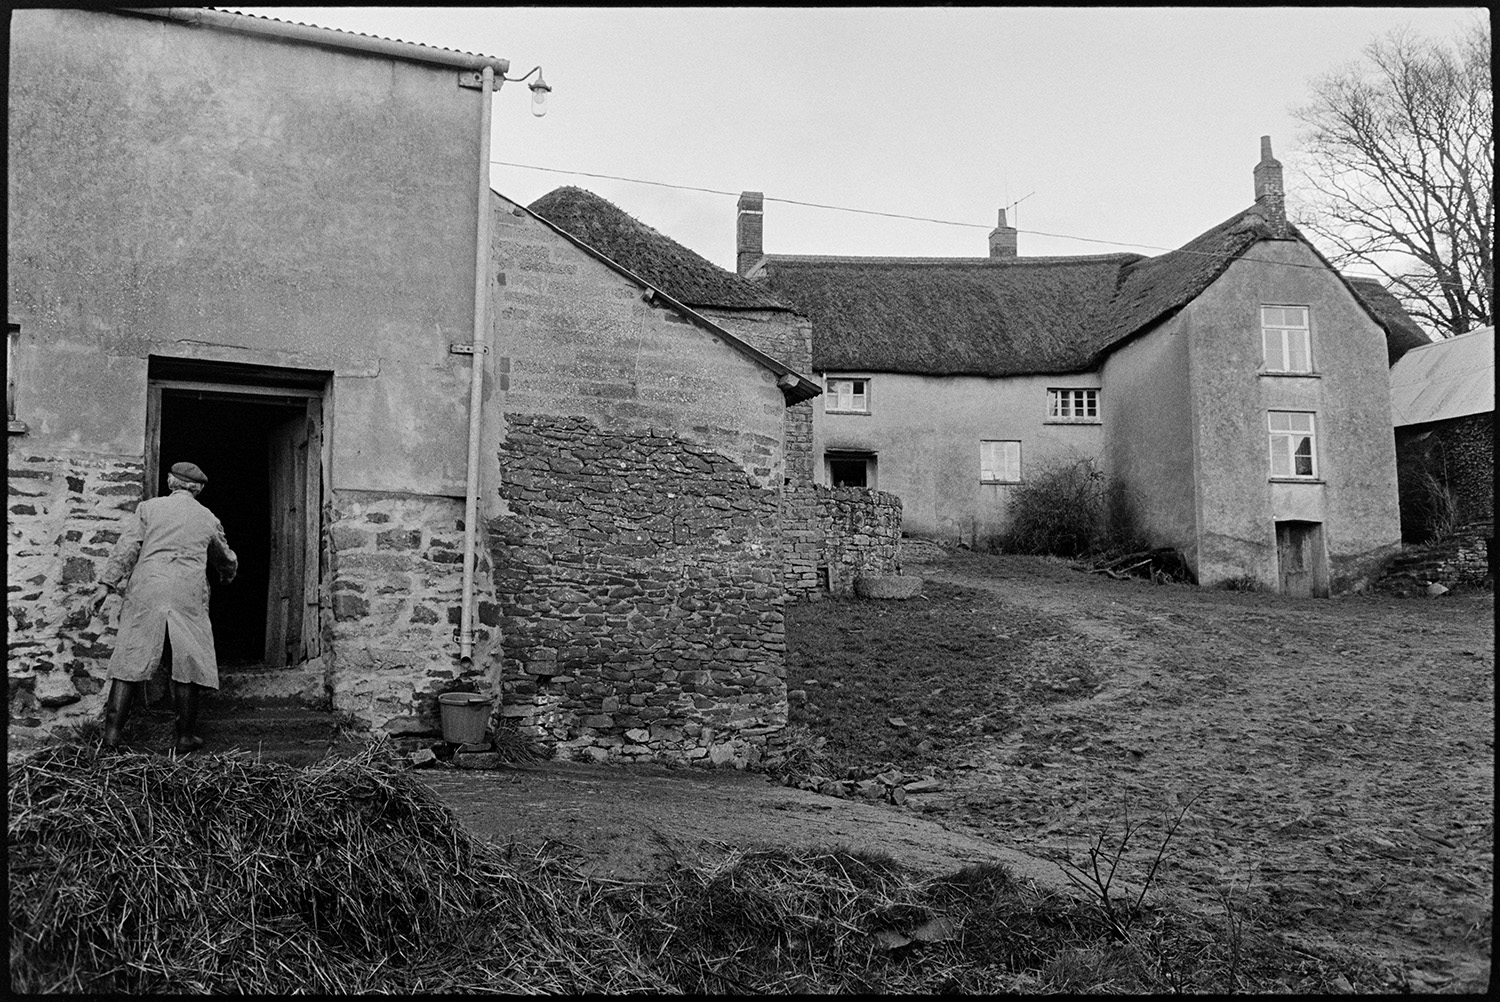 Farmyard with cows, farmhouse. 
[Reg Chamings by a barn doorway at Bridgetown Farm near Iddesleigh. The thatched farmhouse is visible in the background.]